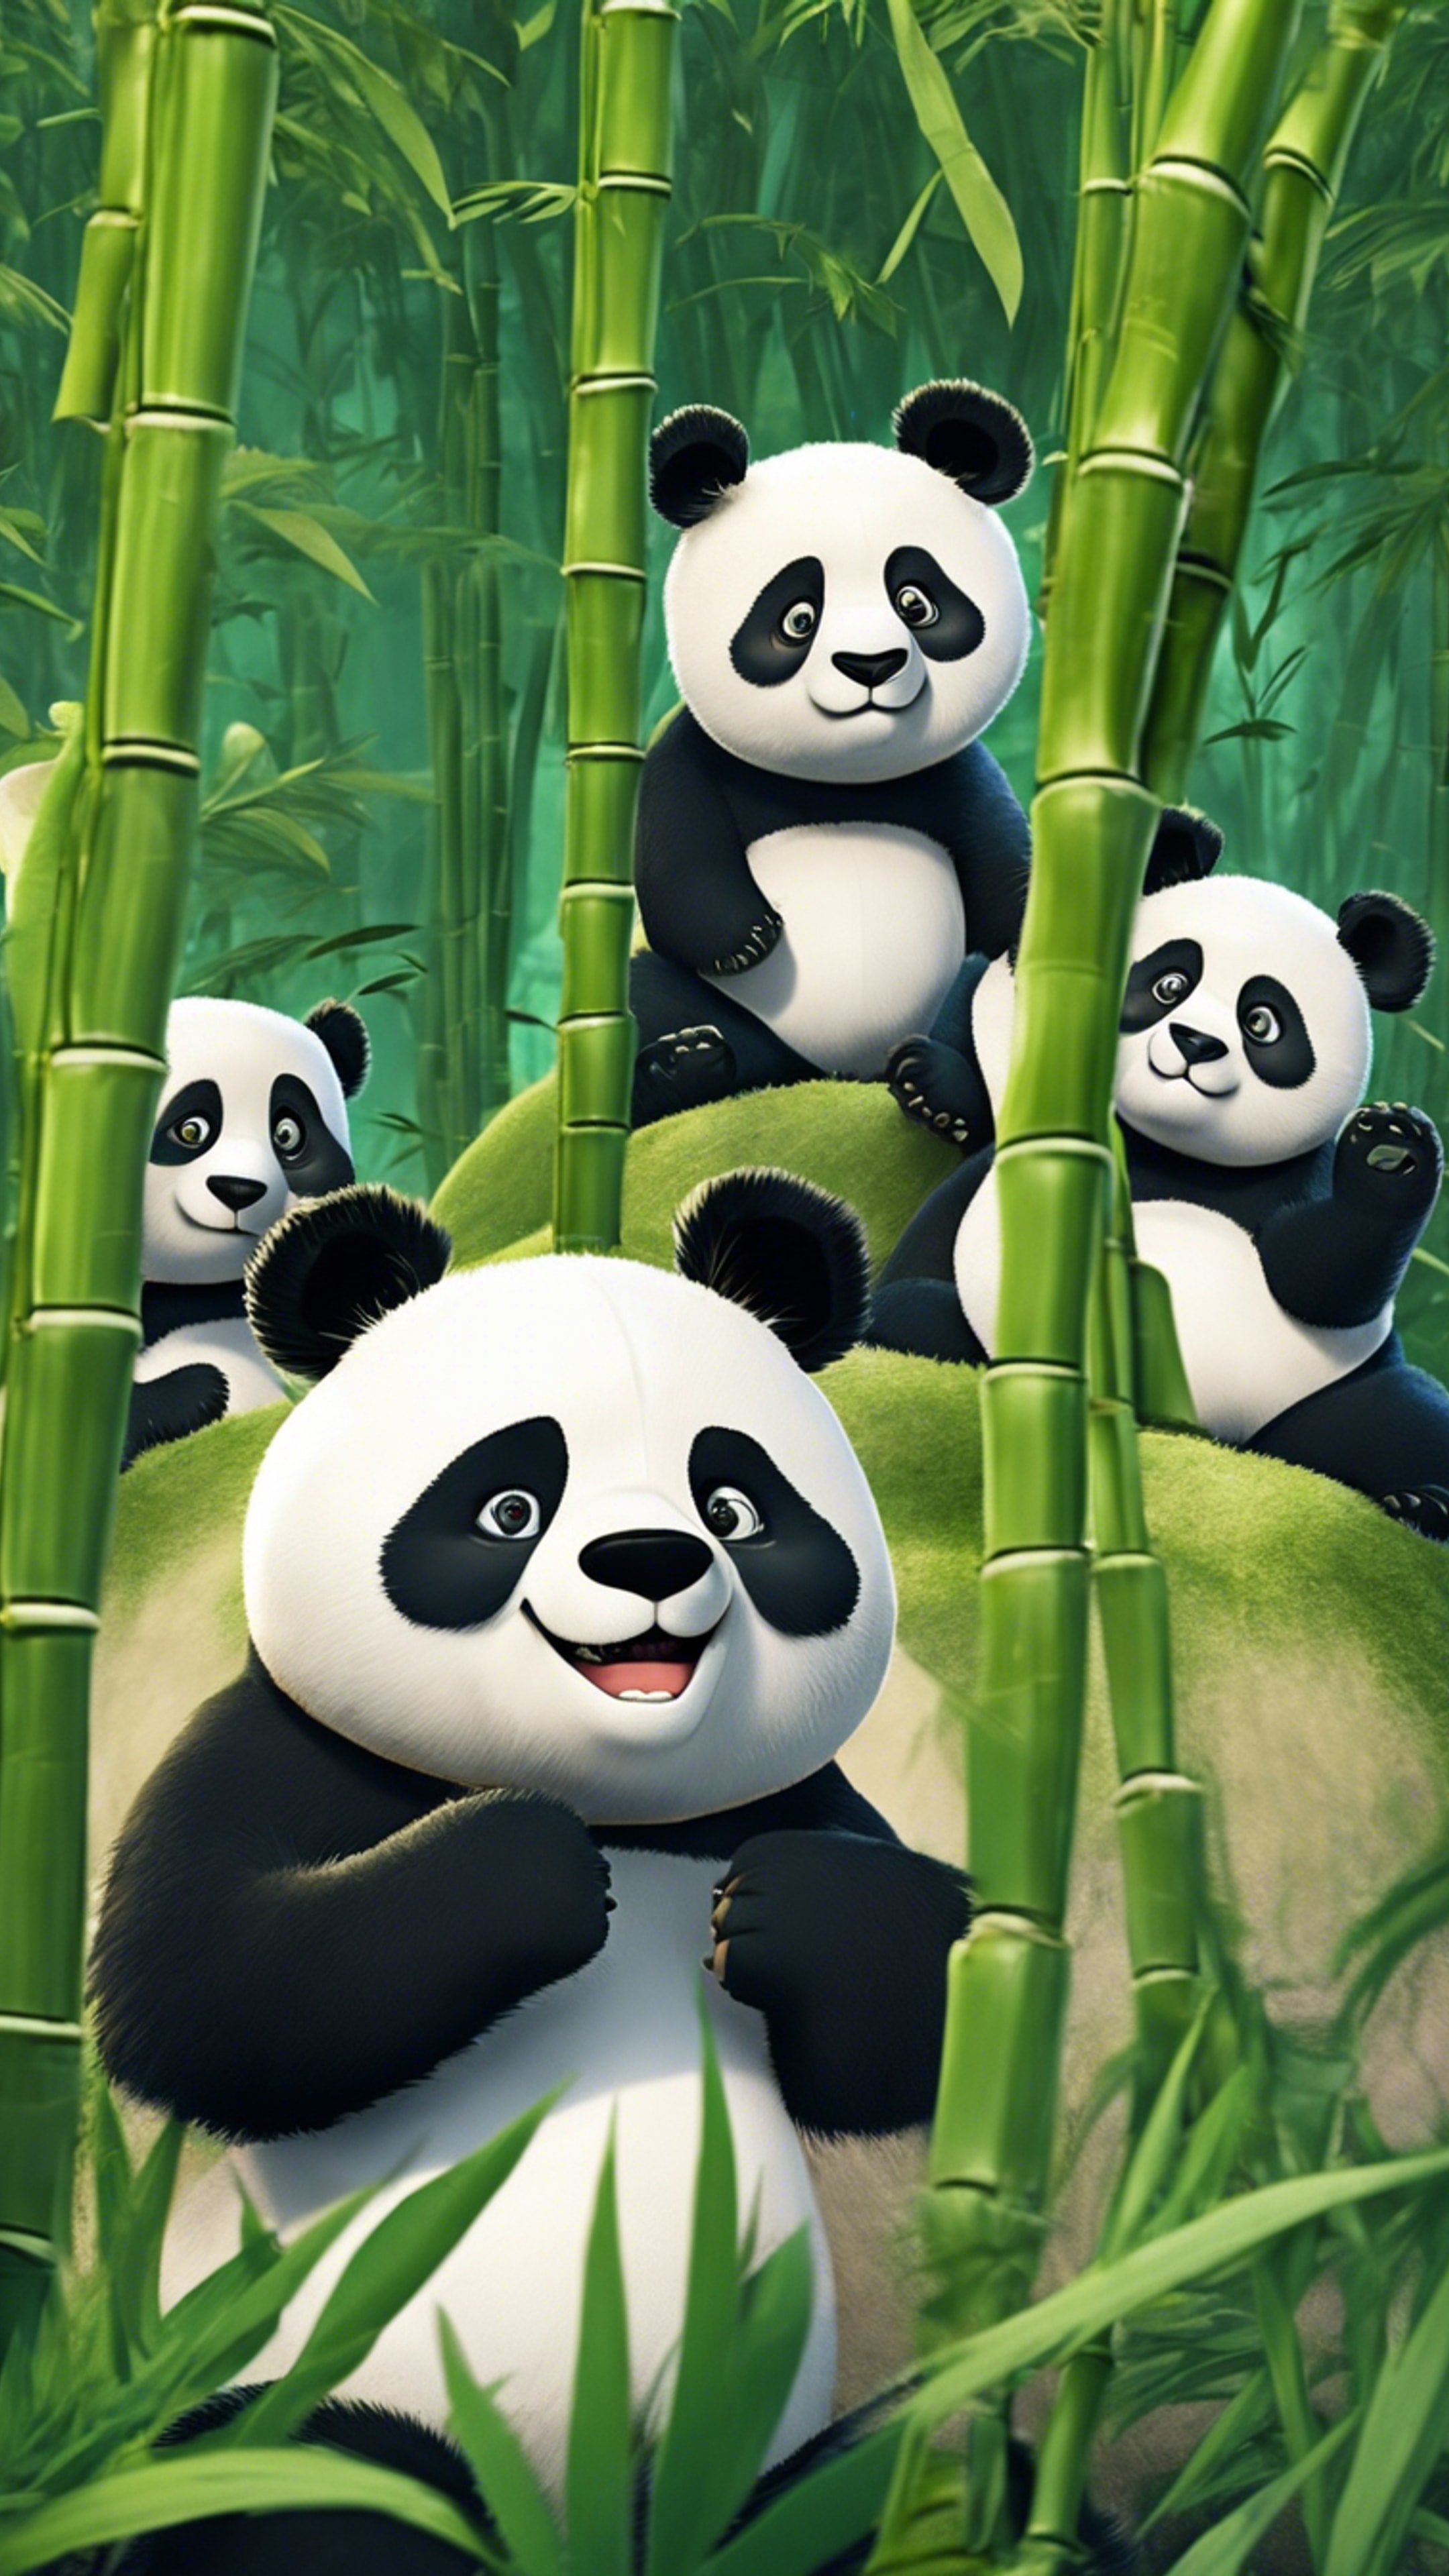 A group of fluffy cartoon pandas playing hide and seek in green bamboo forest. 墙纸[63bcd8976f104e0d843a]